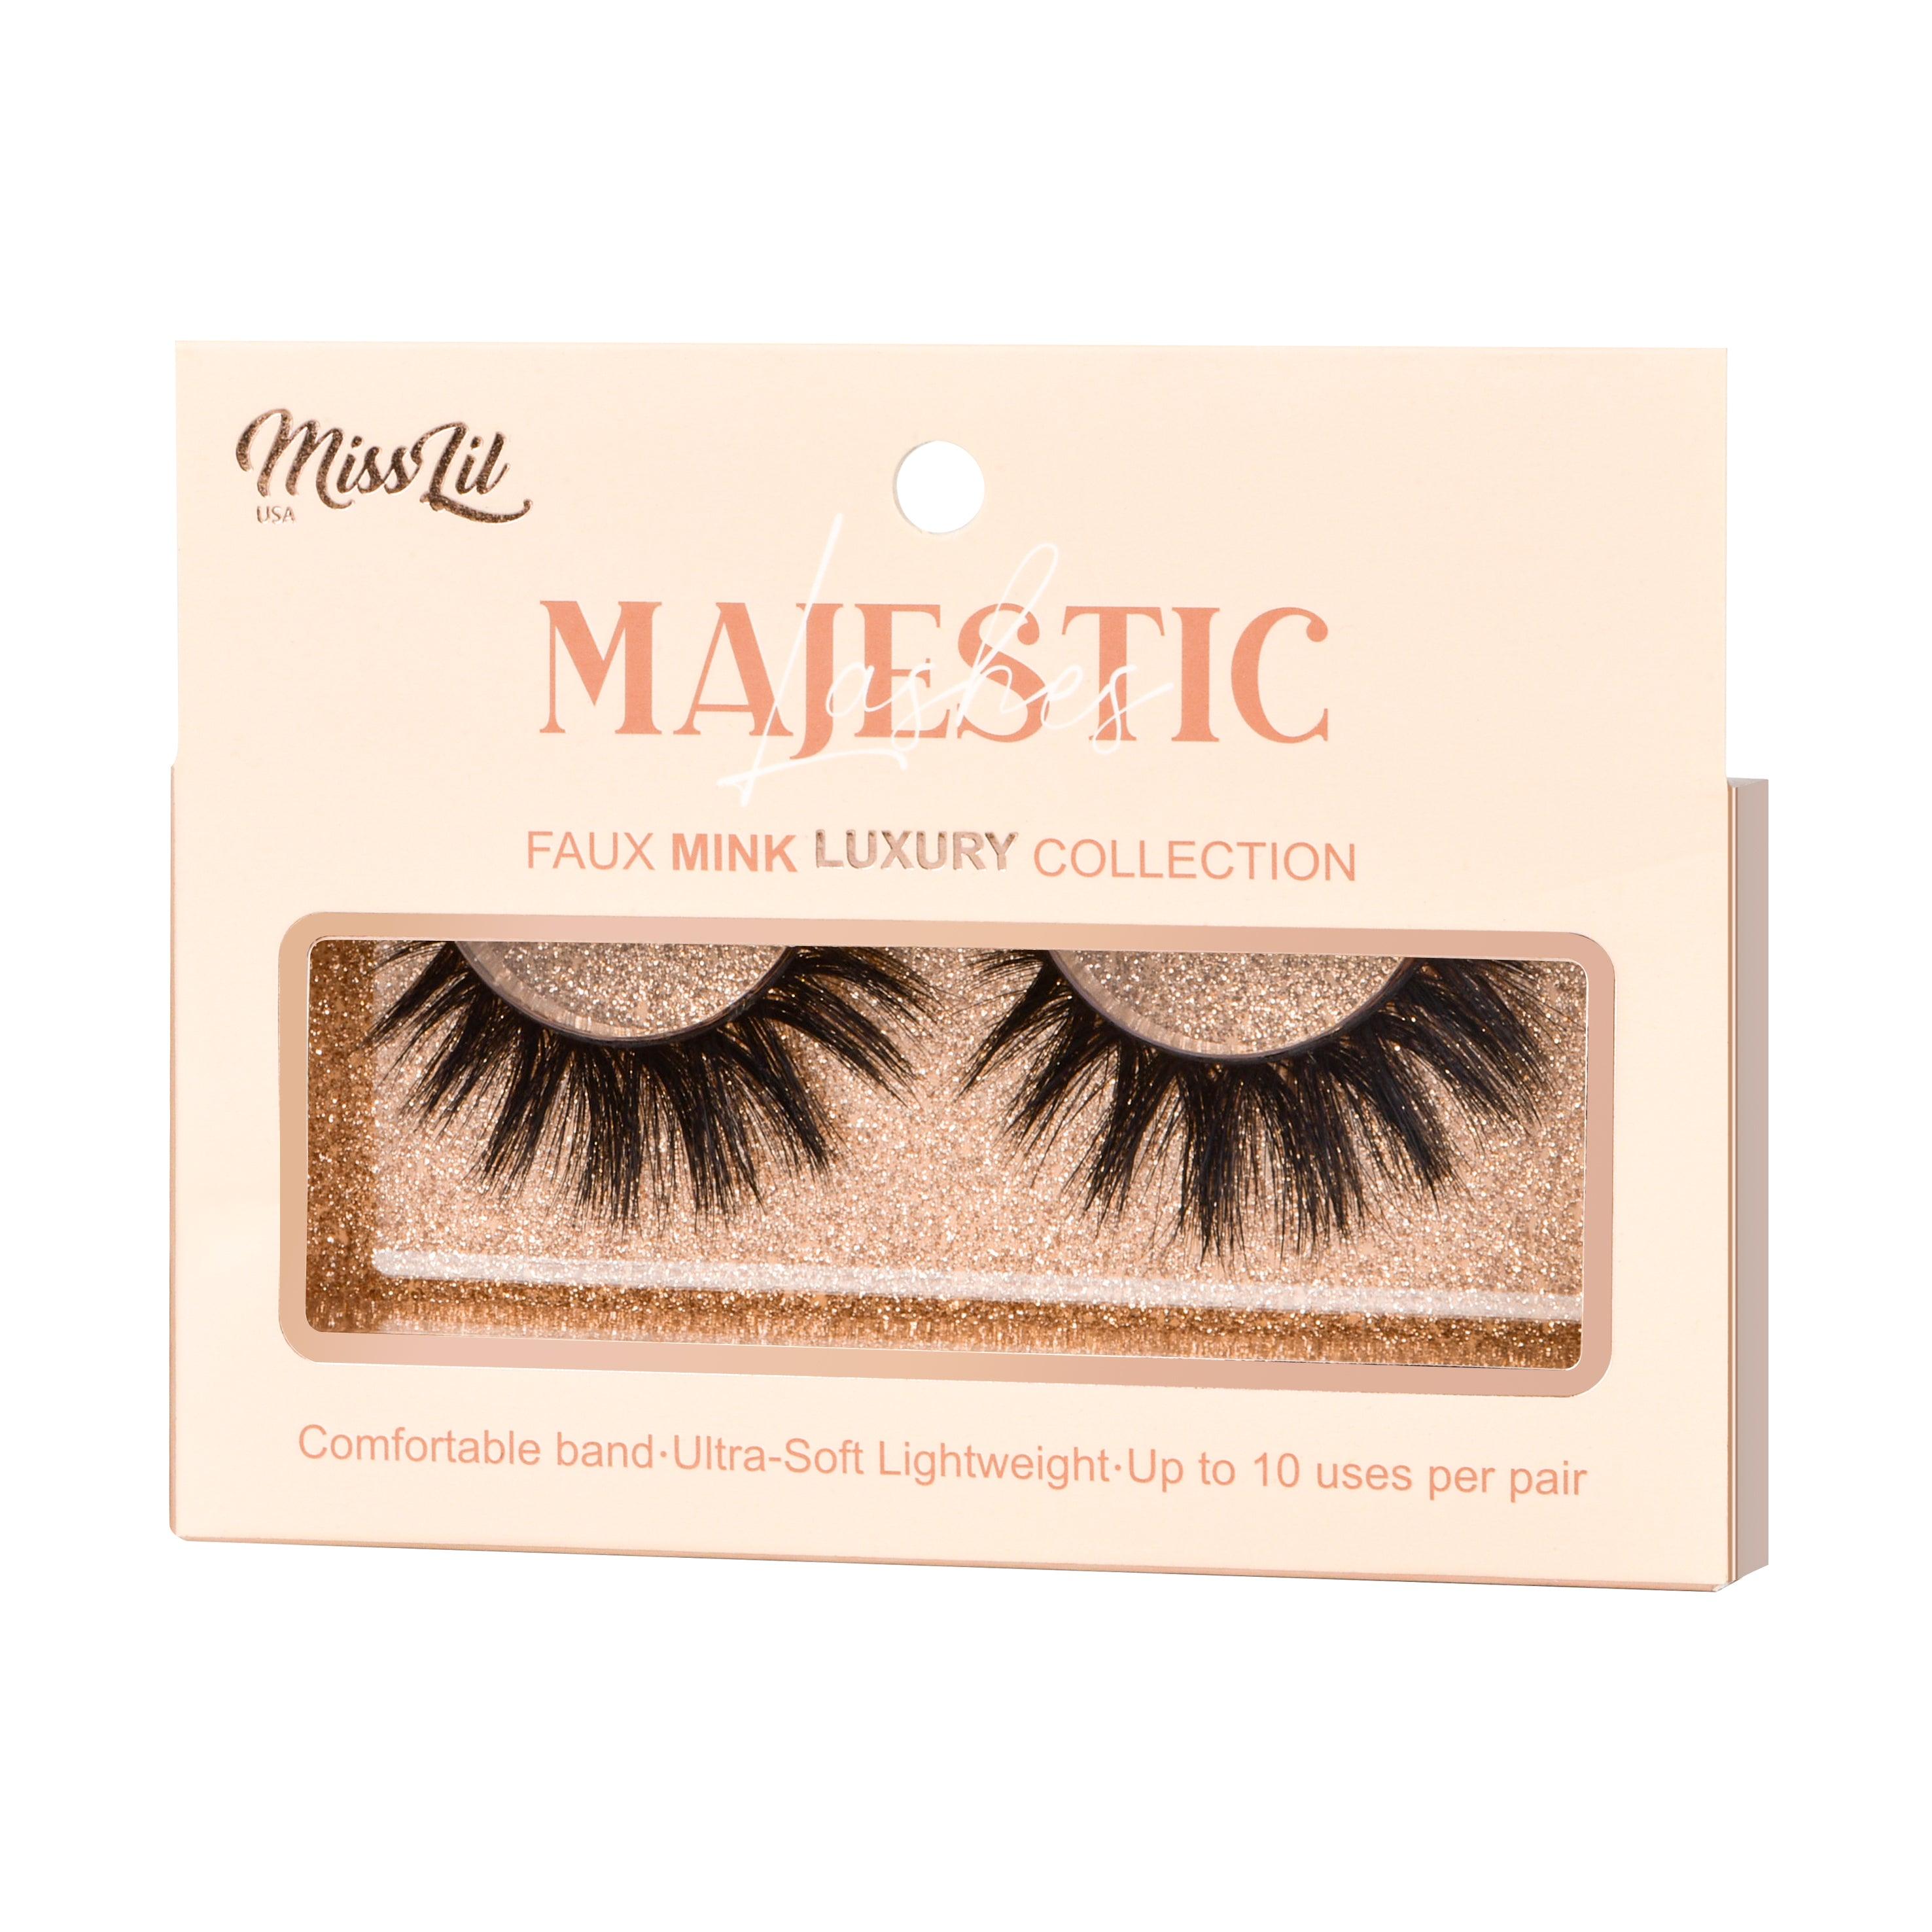 Majestic Collection 28 fake lashes - Miss Lil USA Wholesale